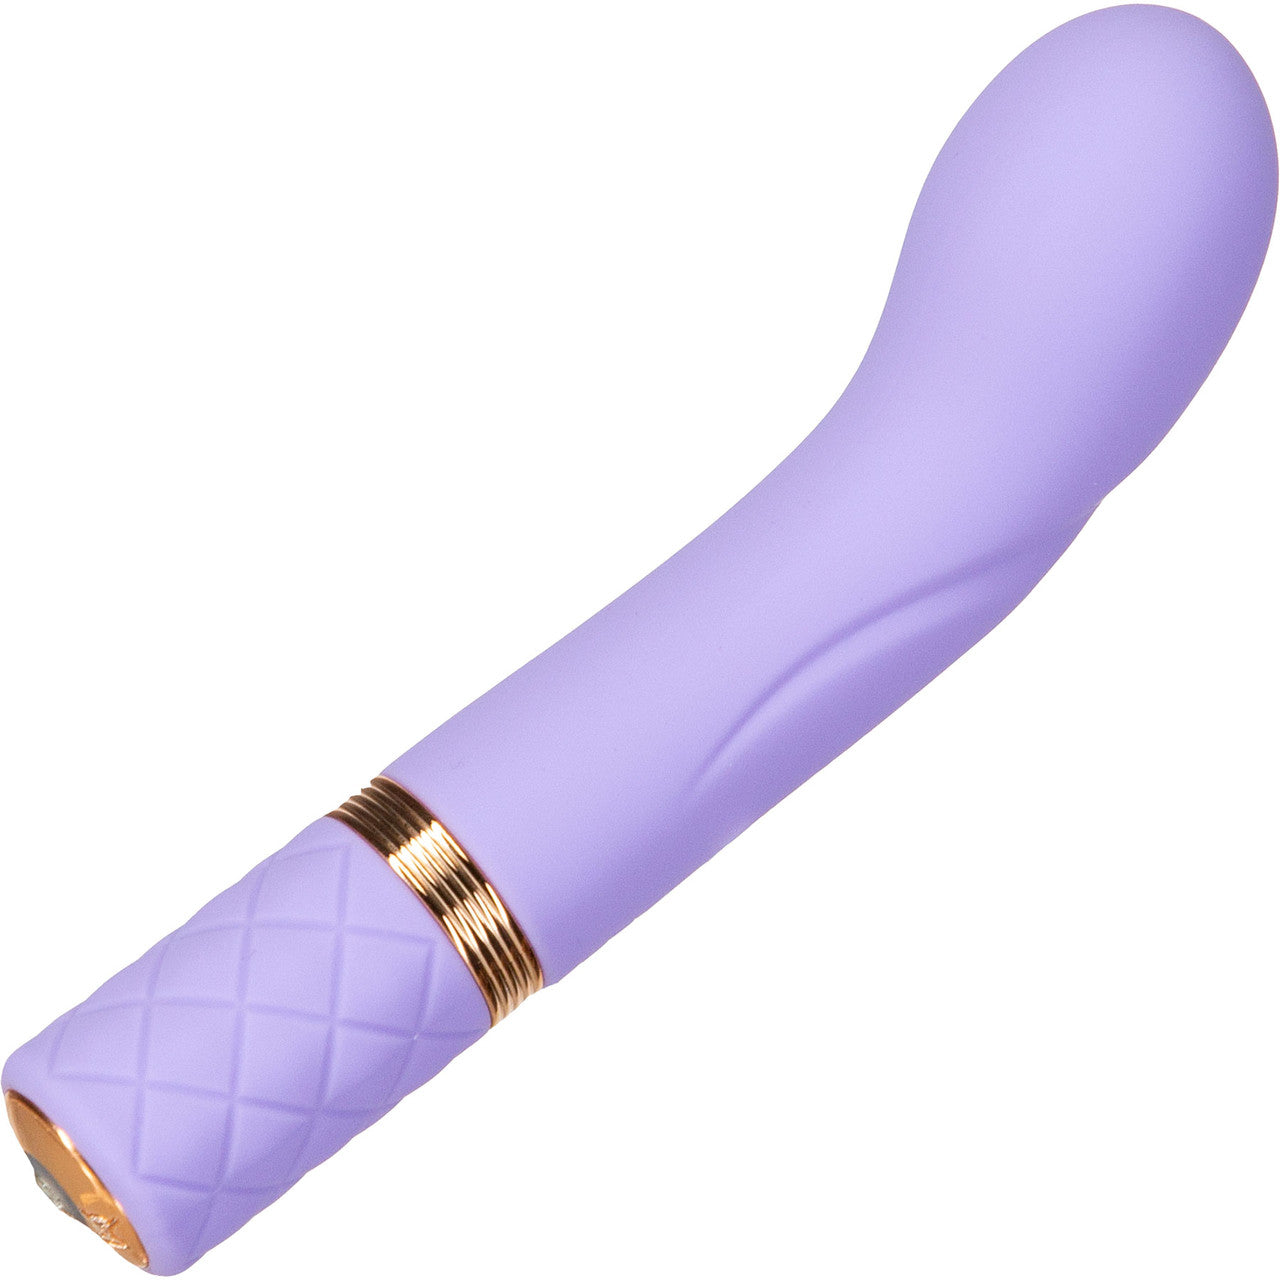 SHOP Pillow Talk Special Edition Racy Mini G-spot vibrator with Swarovski crystal | Purple $86.95AUD FREE SHIPPING. The luxurious mini massager from Pillow Talk is getting a makeover with a beautiful lilac hue and rose gold accenting. Added bonuses to the popular toy now include a fun foreplay card game as well as a silky satin blindfold for enhanced play possibilities. 